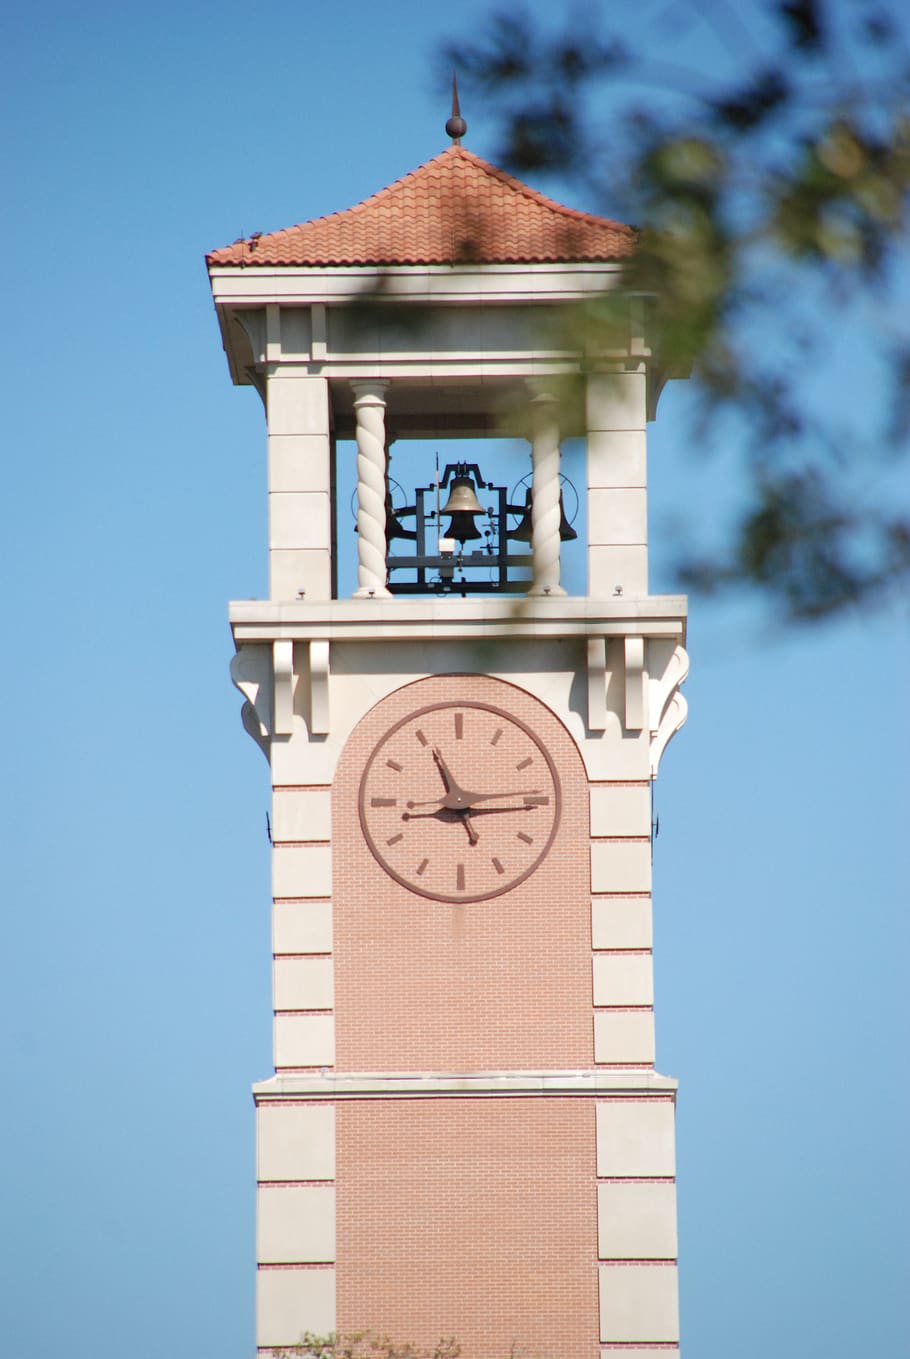 university, university of south alabama, bell tower, clock, time, architecture, tower, built structure, building, clock tower